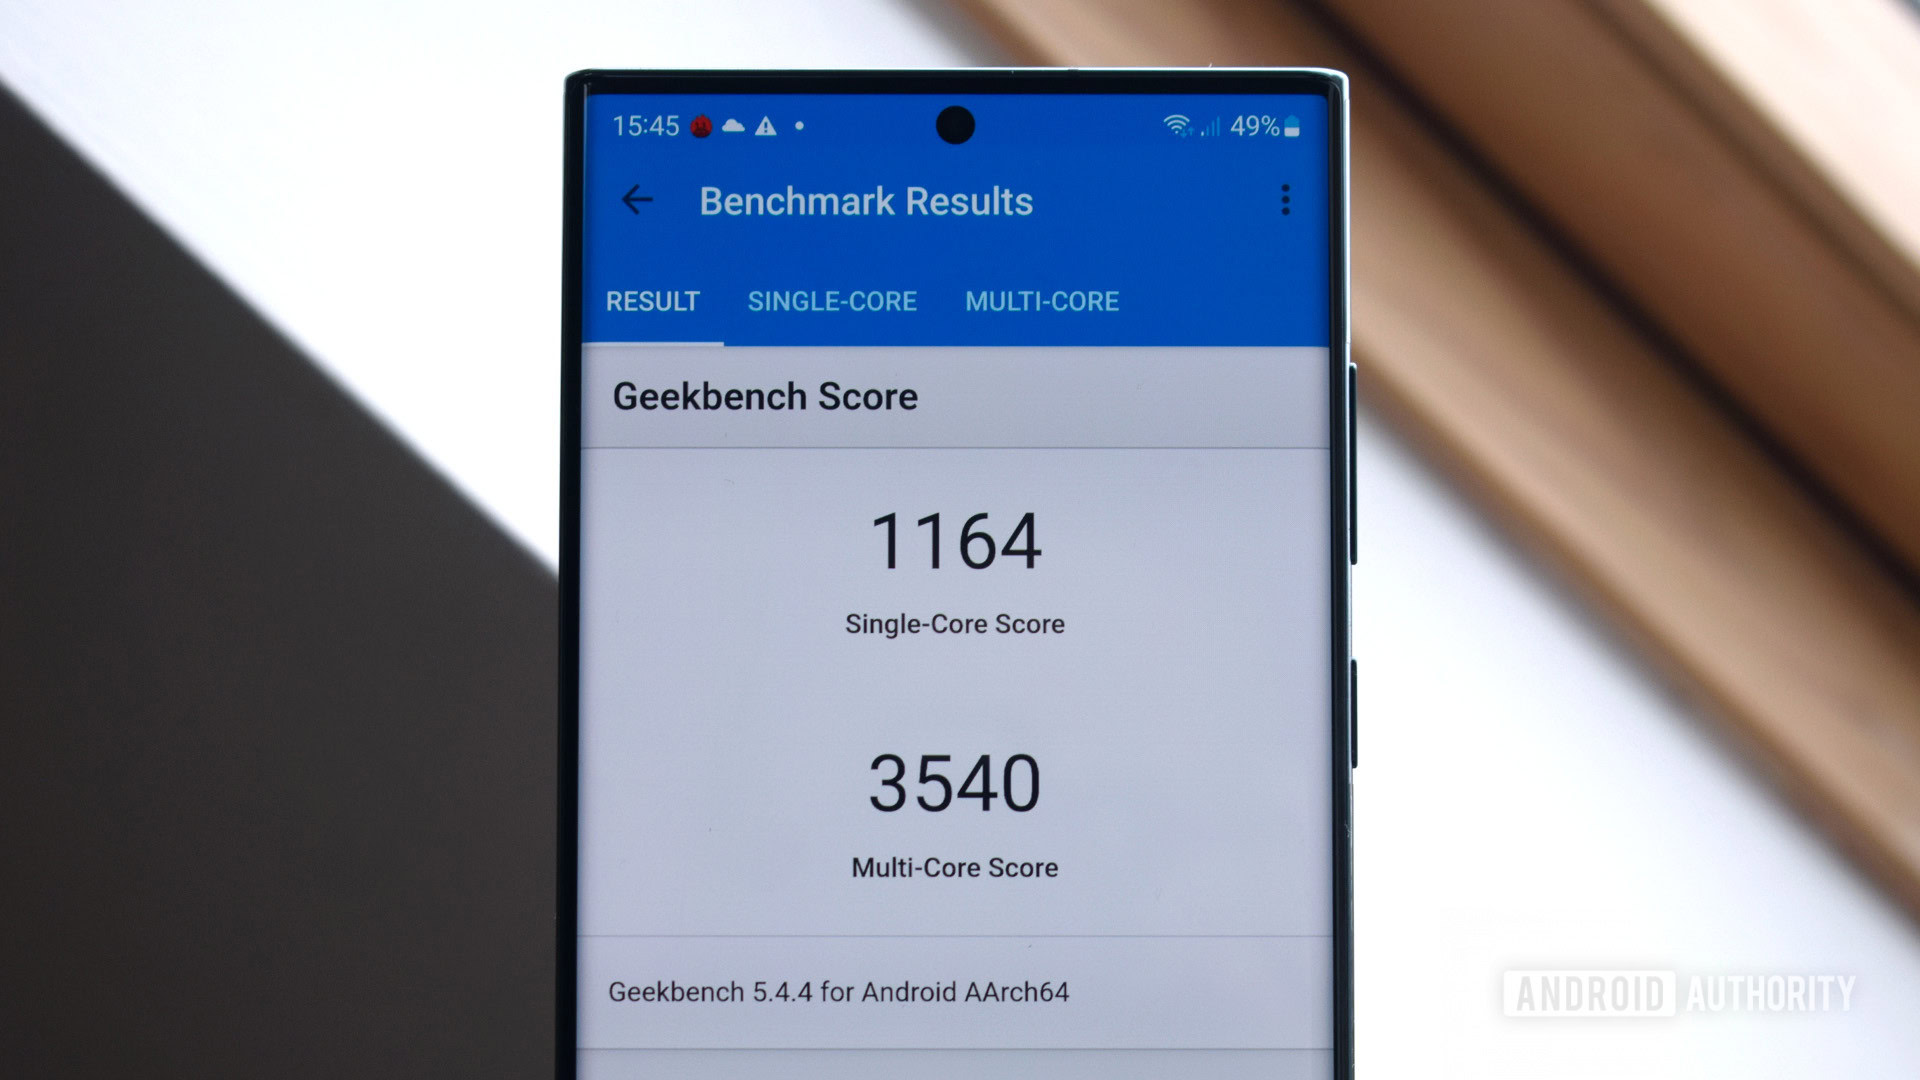 Why you should test your mobile performance